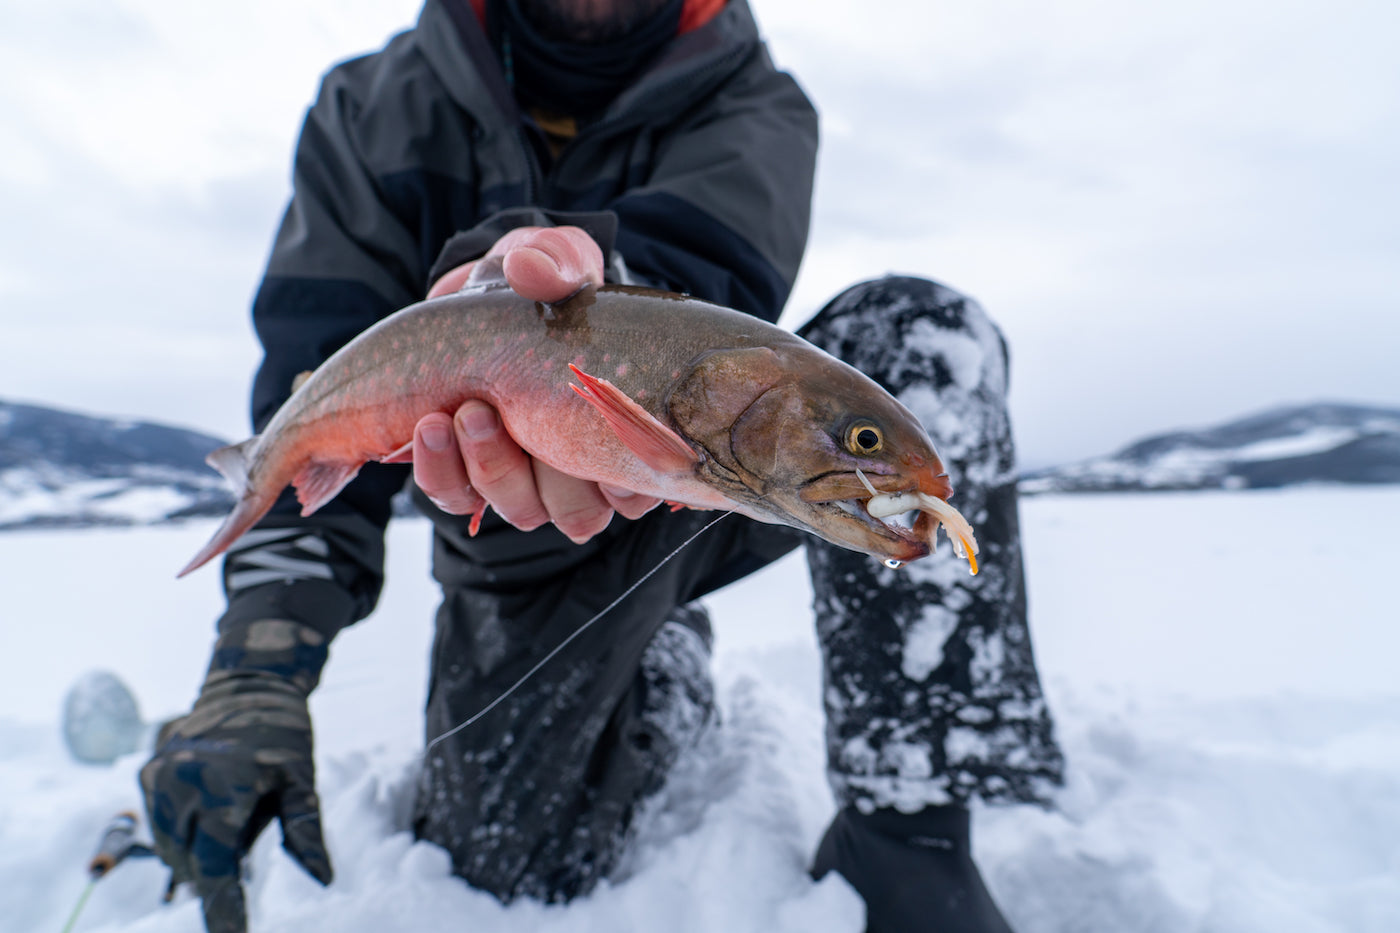 Colorado Fishing Articles - Ice Fishing with Floats. You'll Catch